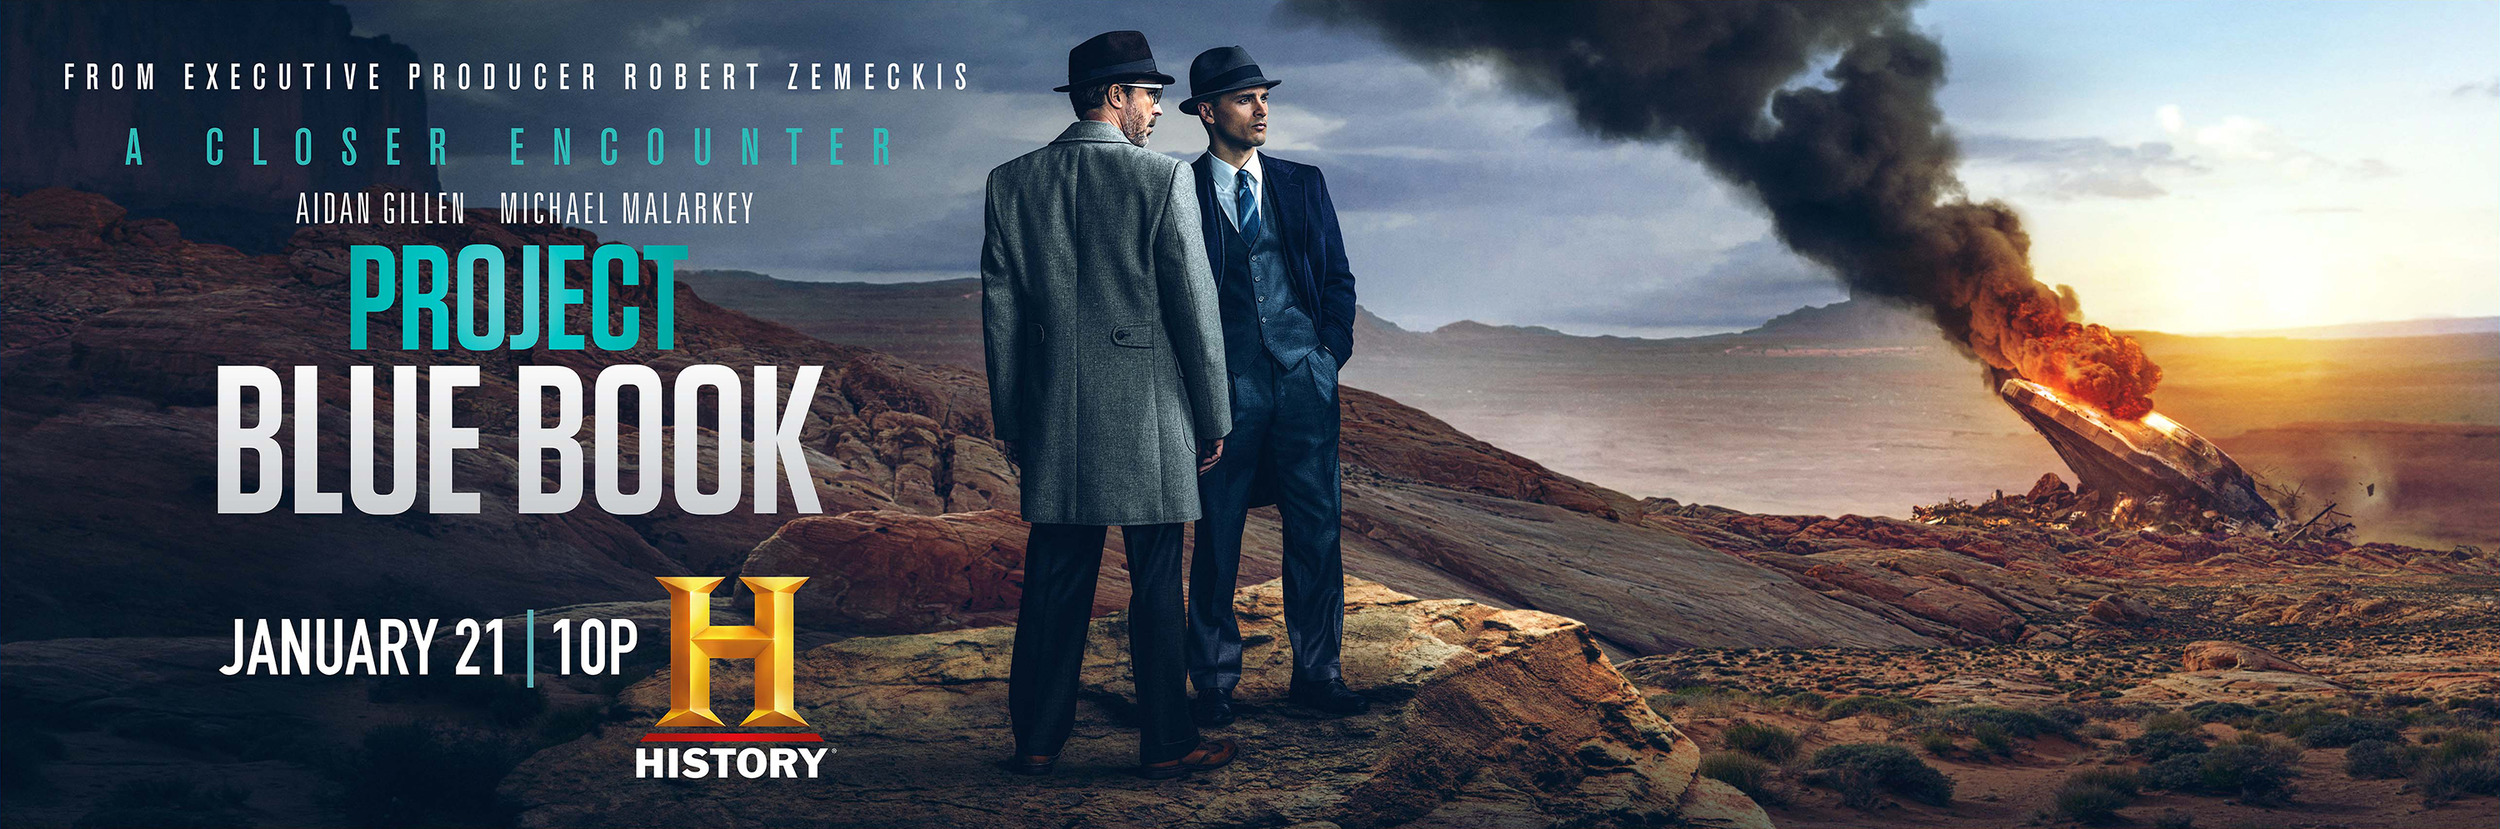 Mega Sized TV Poster Image for Project Blue Book (#6 of 6)